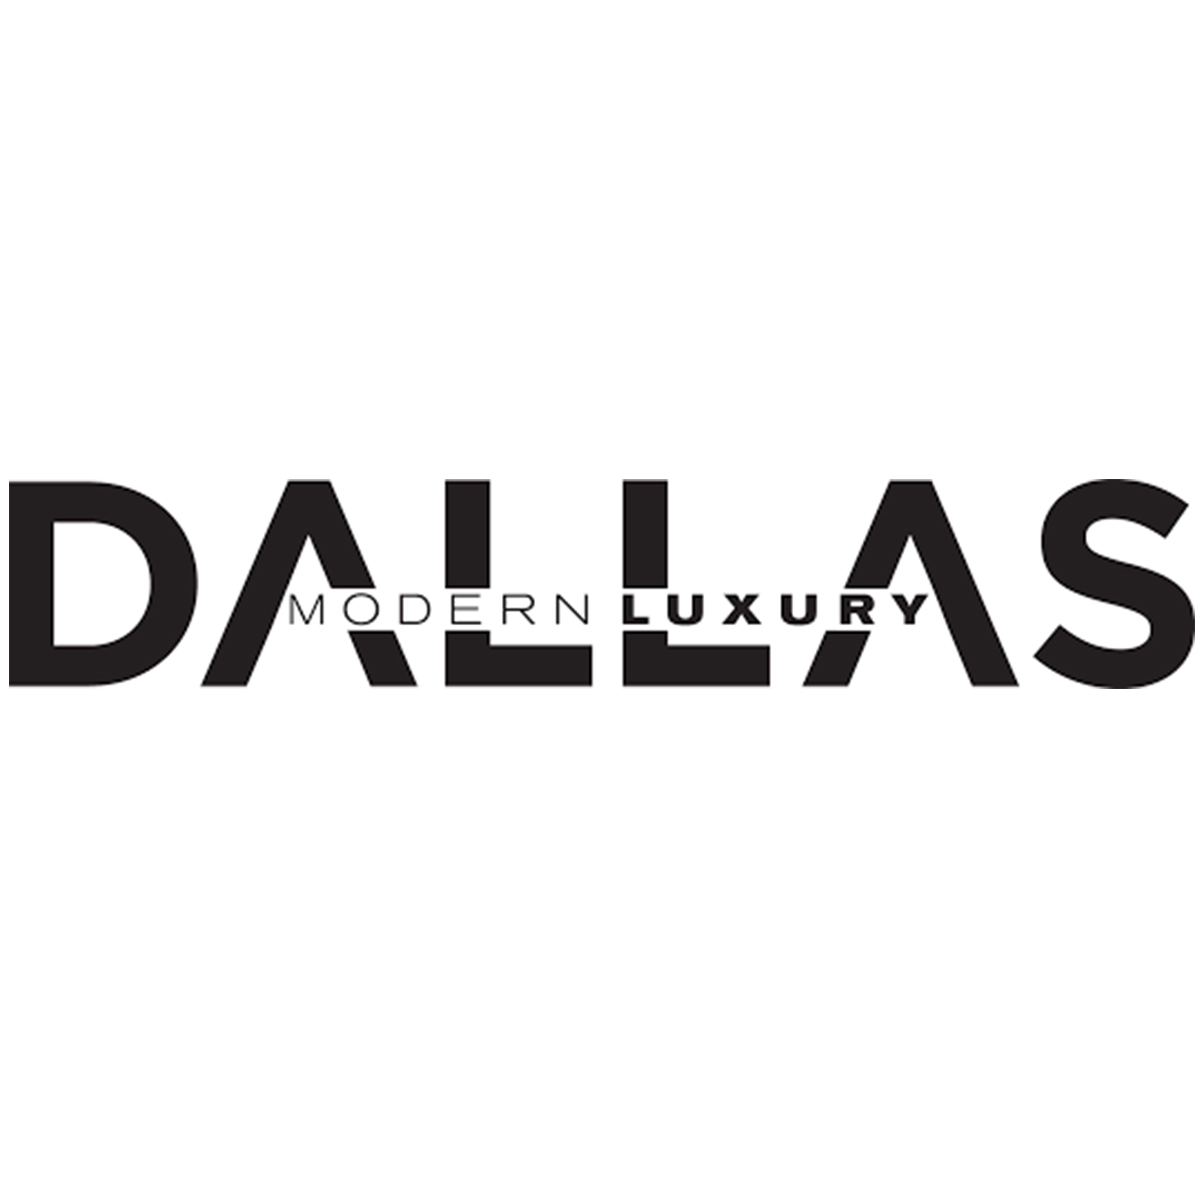 Modern Luxury Dallas – About Town